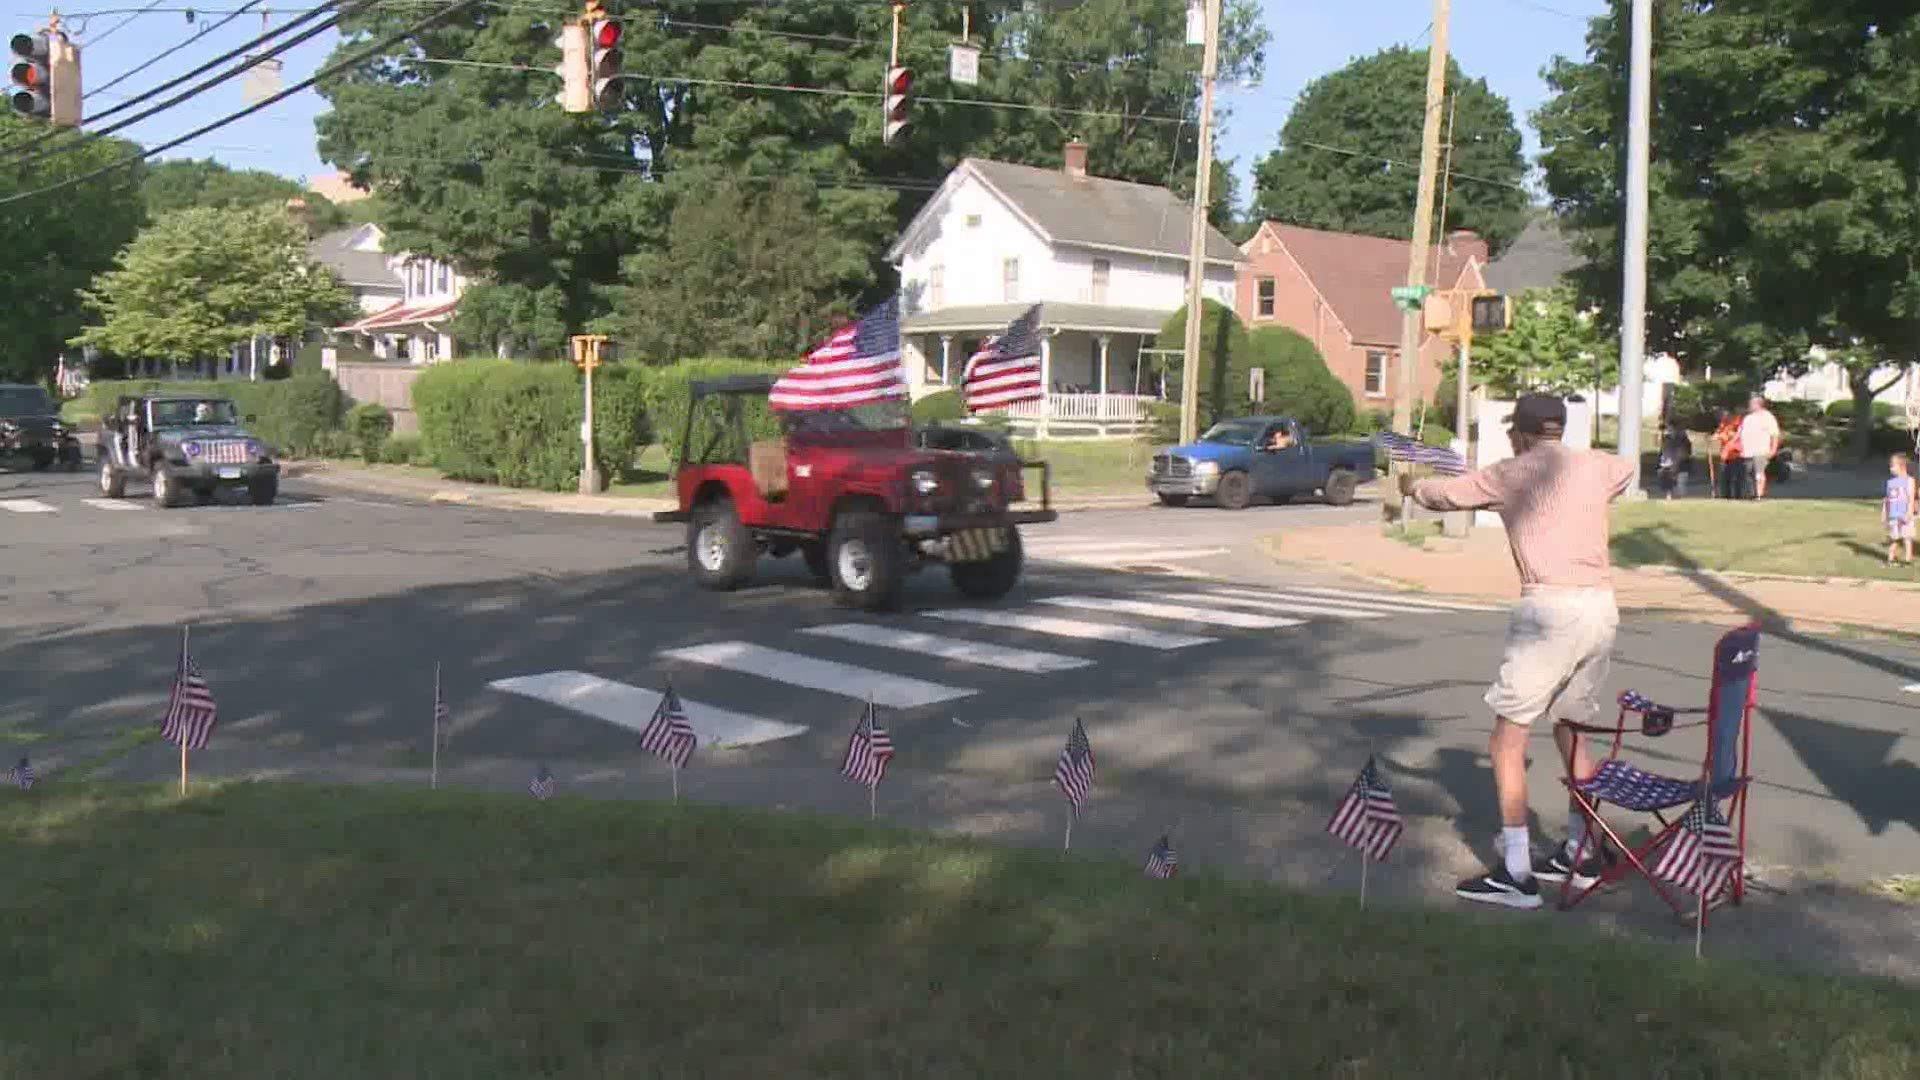 After seeing the veteran's patriotism and dedication on FOX61, some people decided to show him theirs.